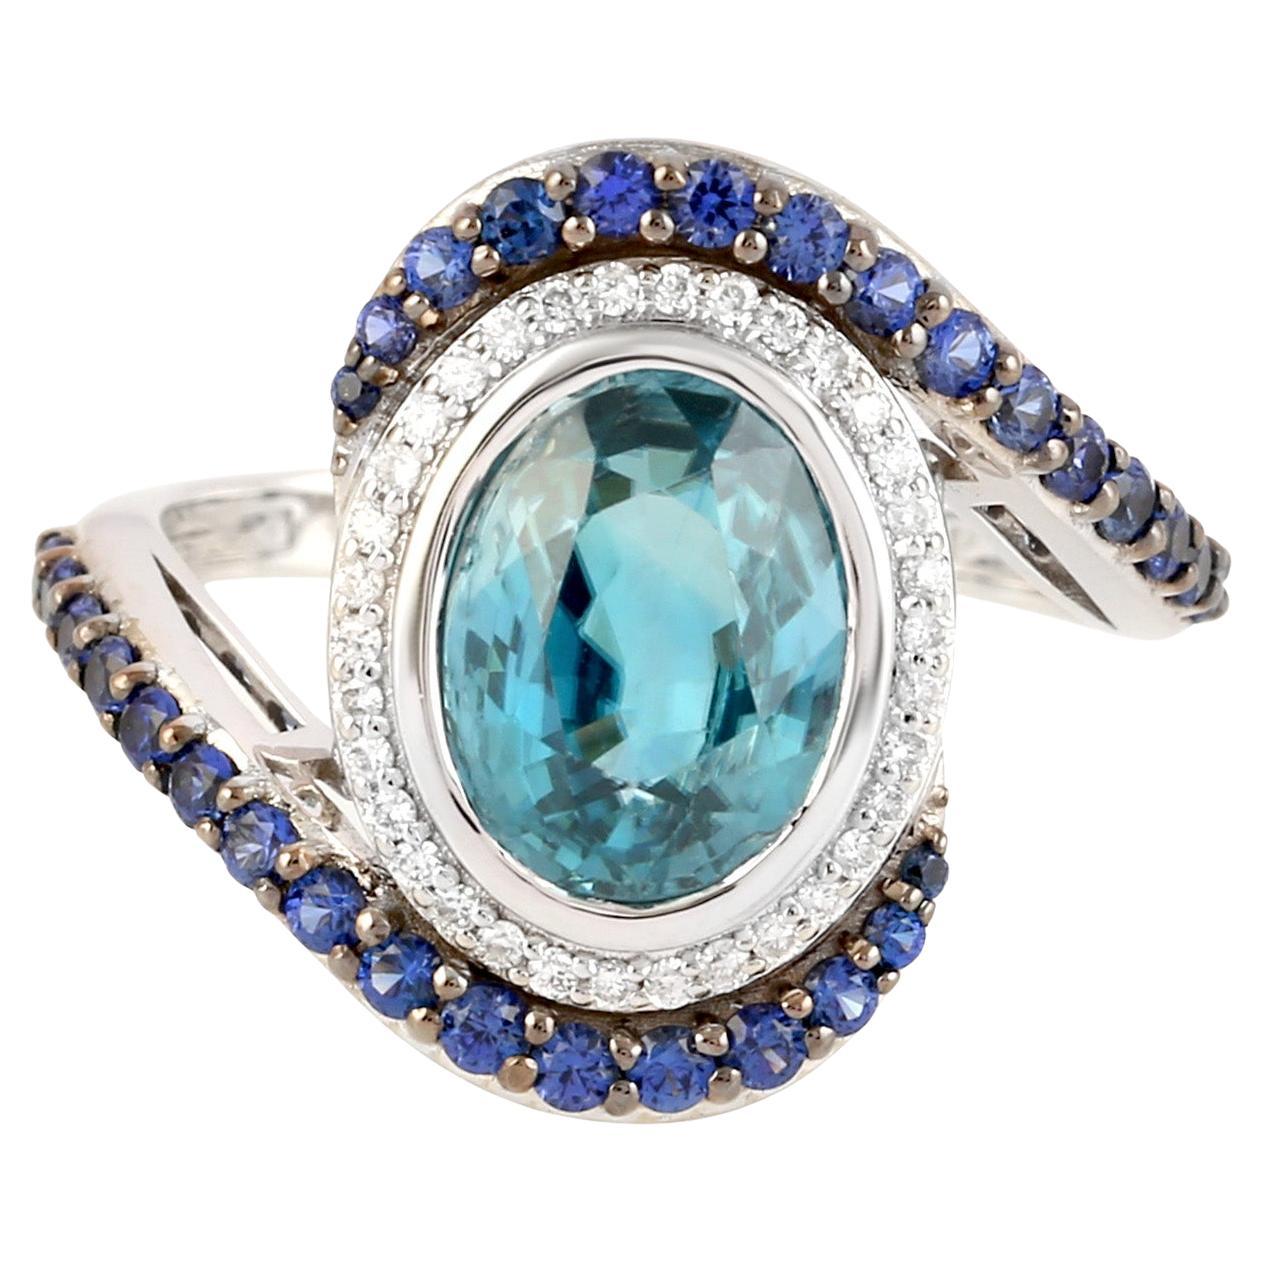 Blue Zircon Ring With Sapphires and Diamonds 4.65 Carats 18K White Gold For Sale